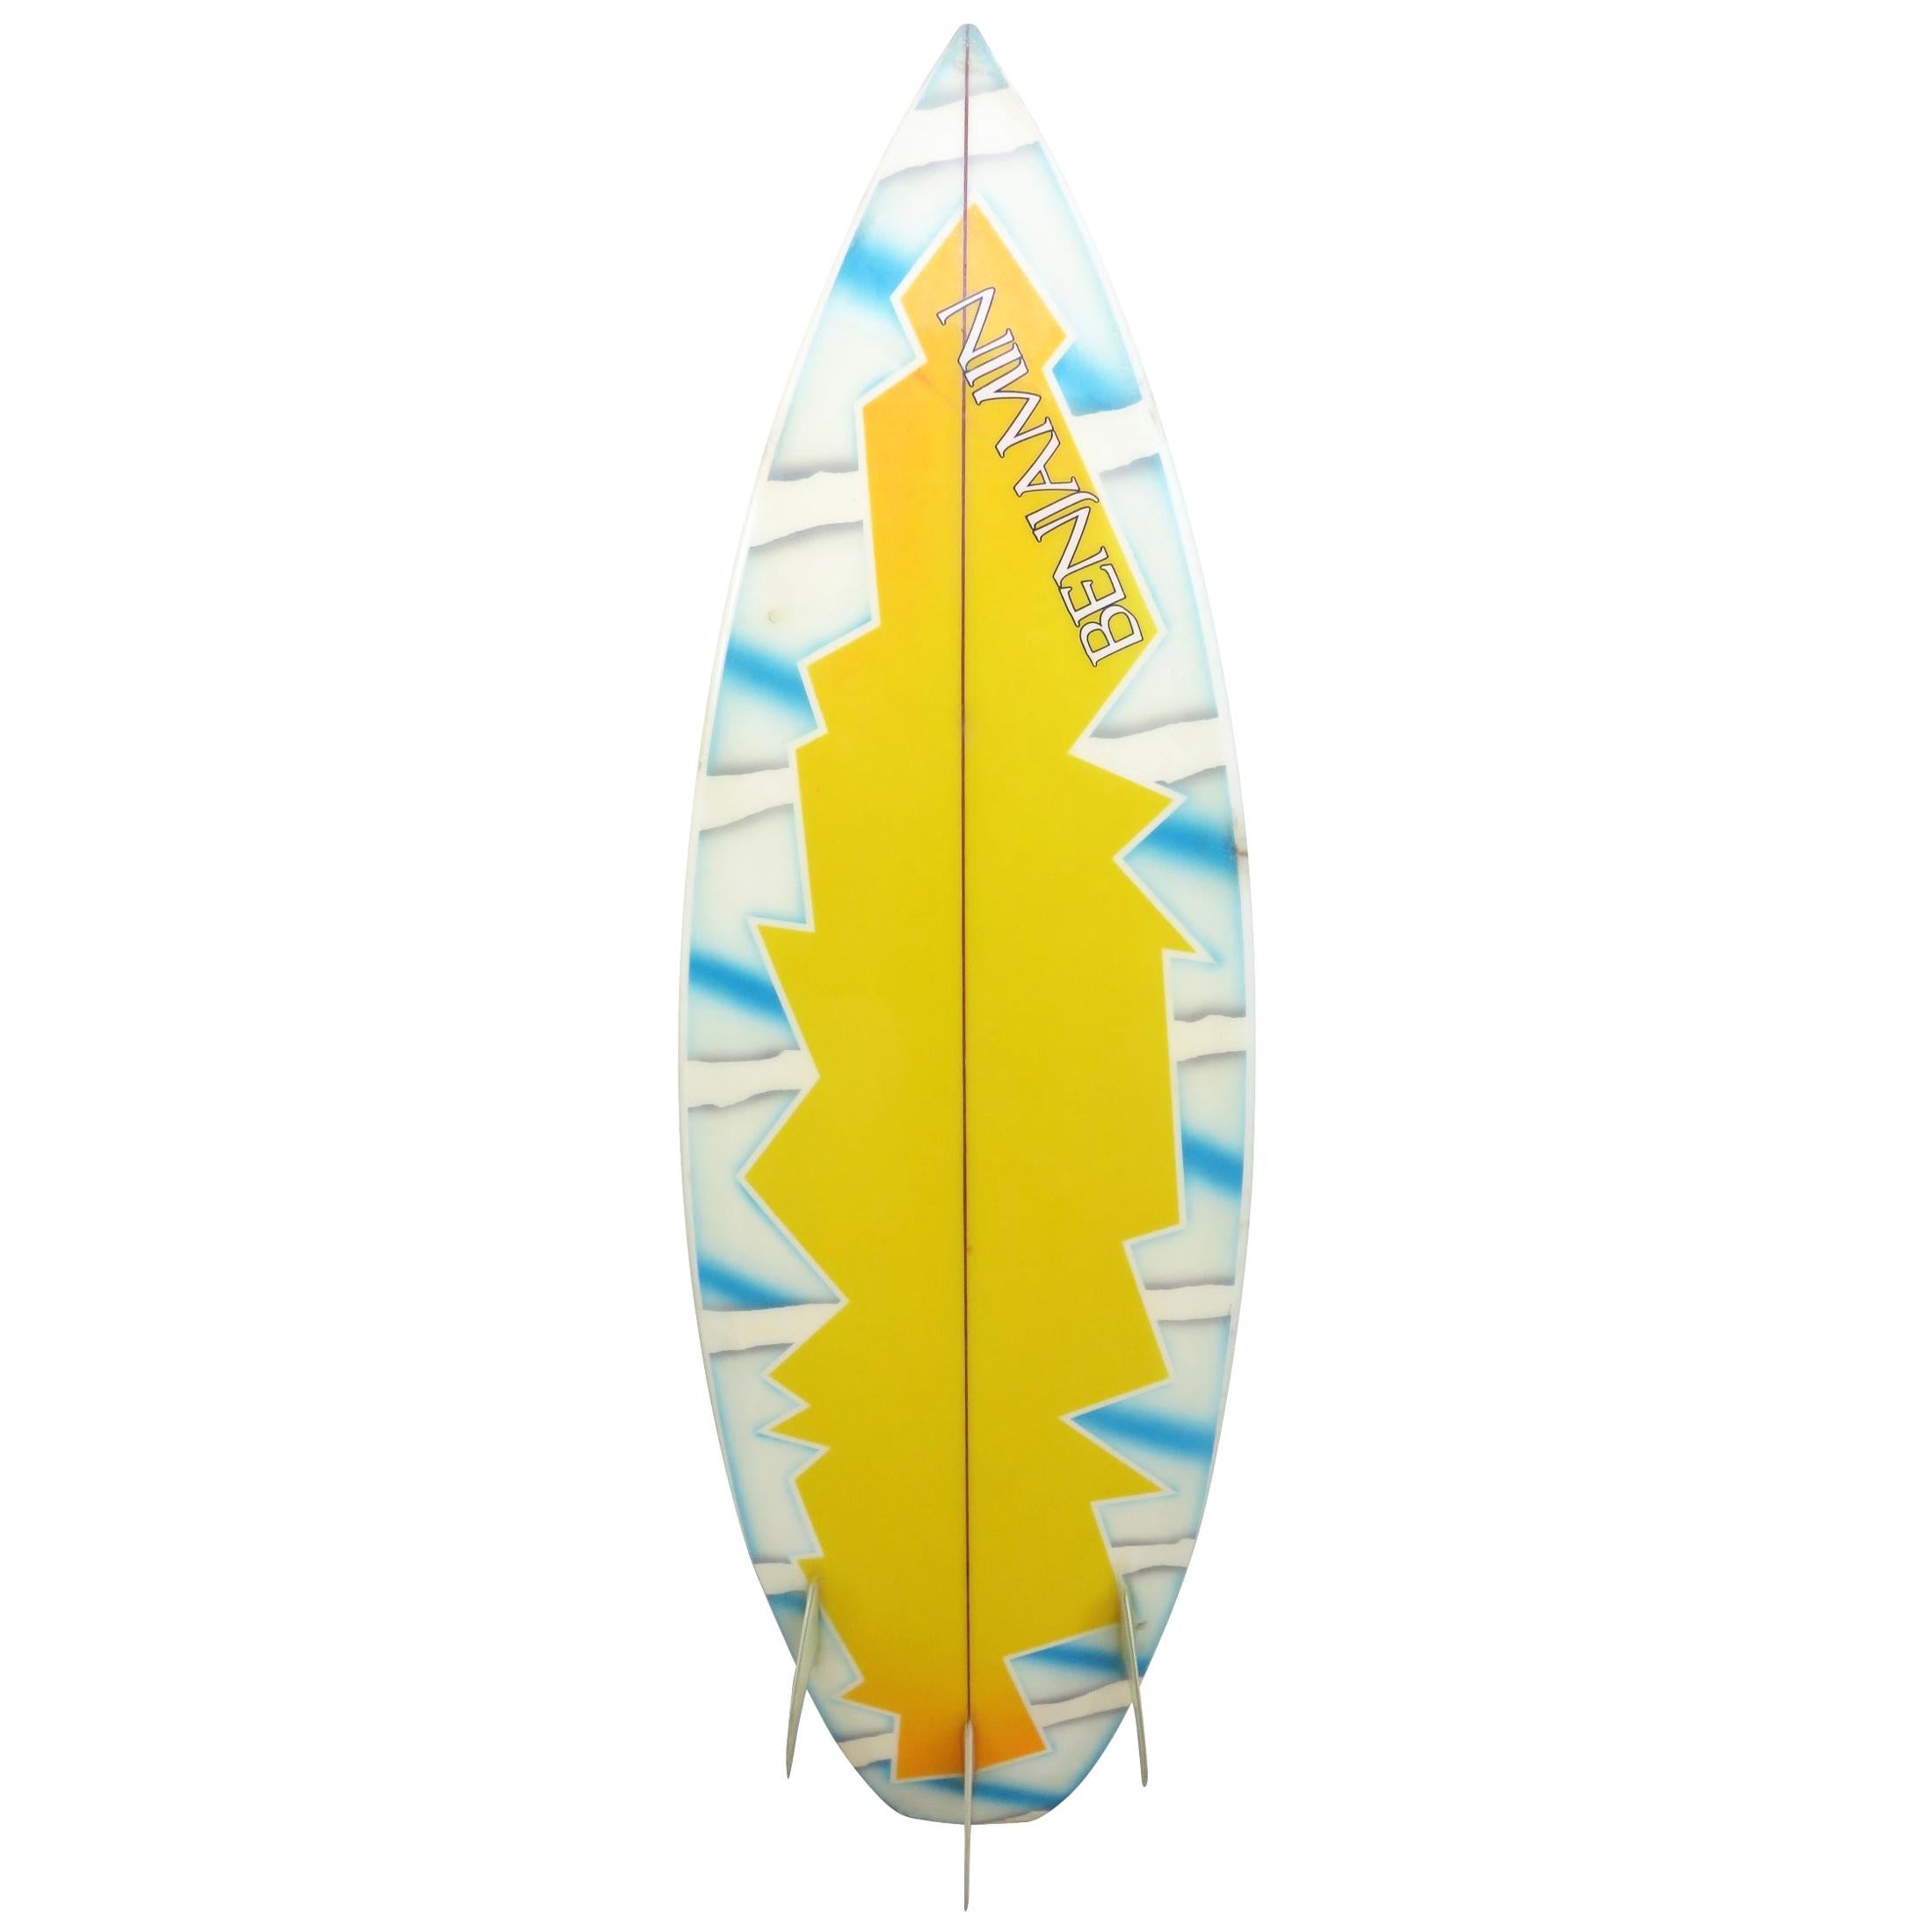 Vintage 1980s Benjamin Surfboard by Terry Martin